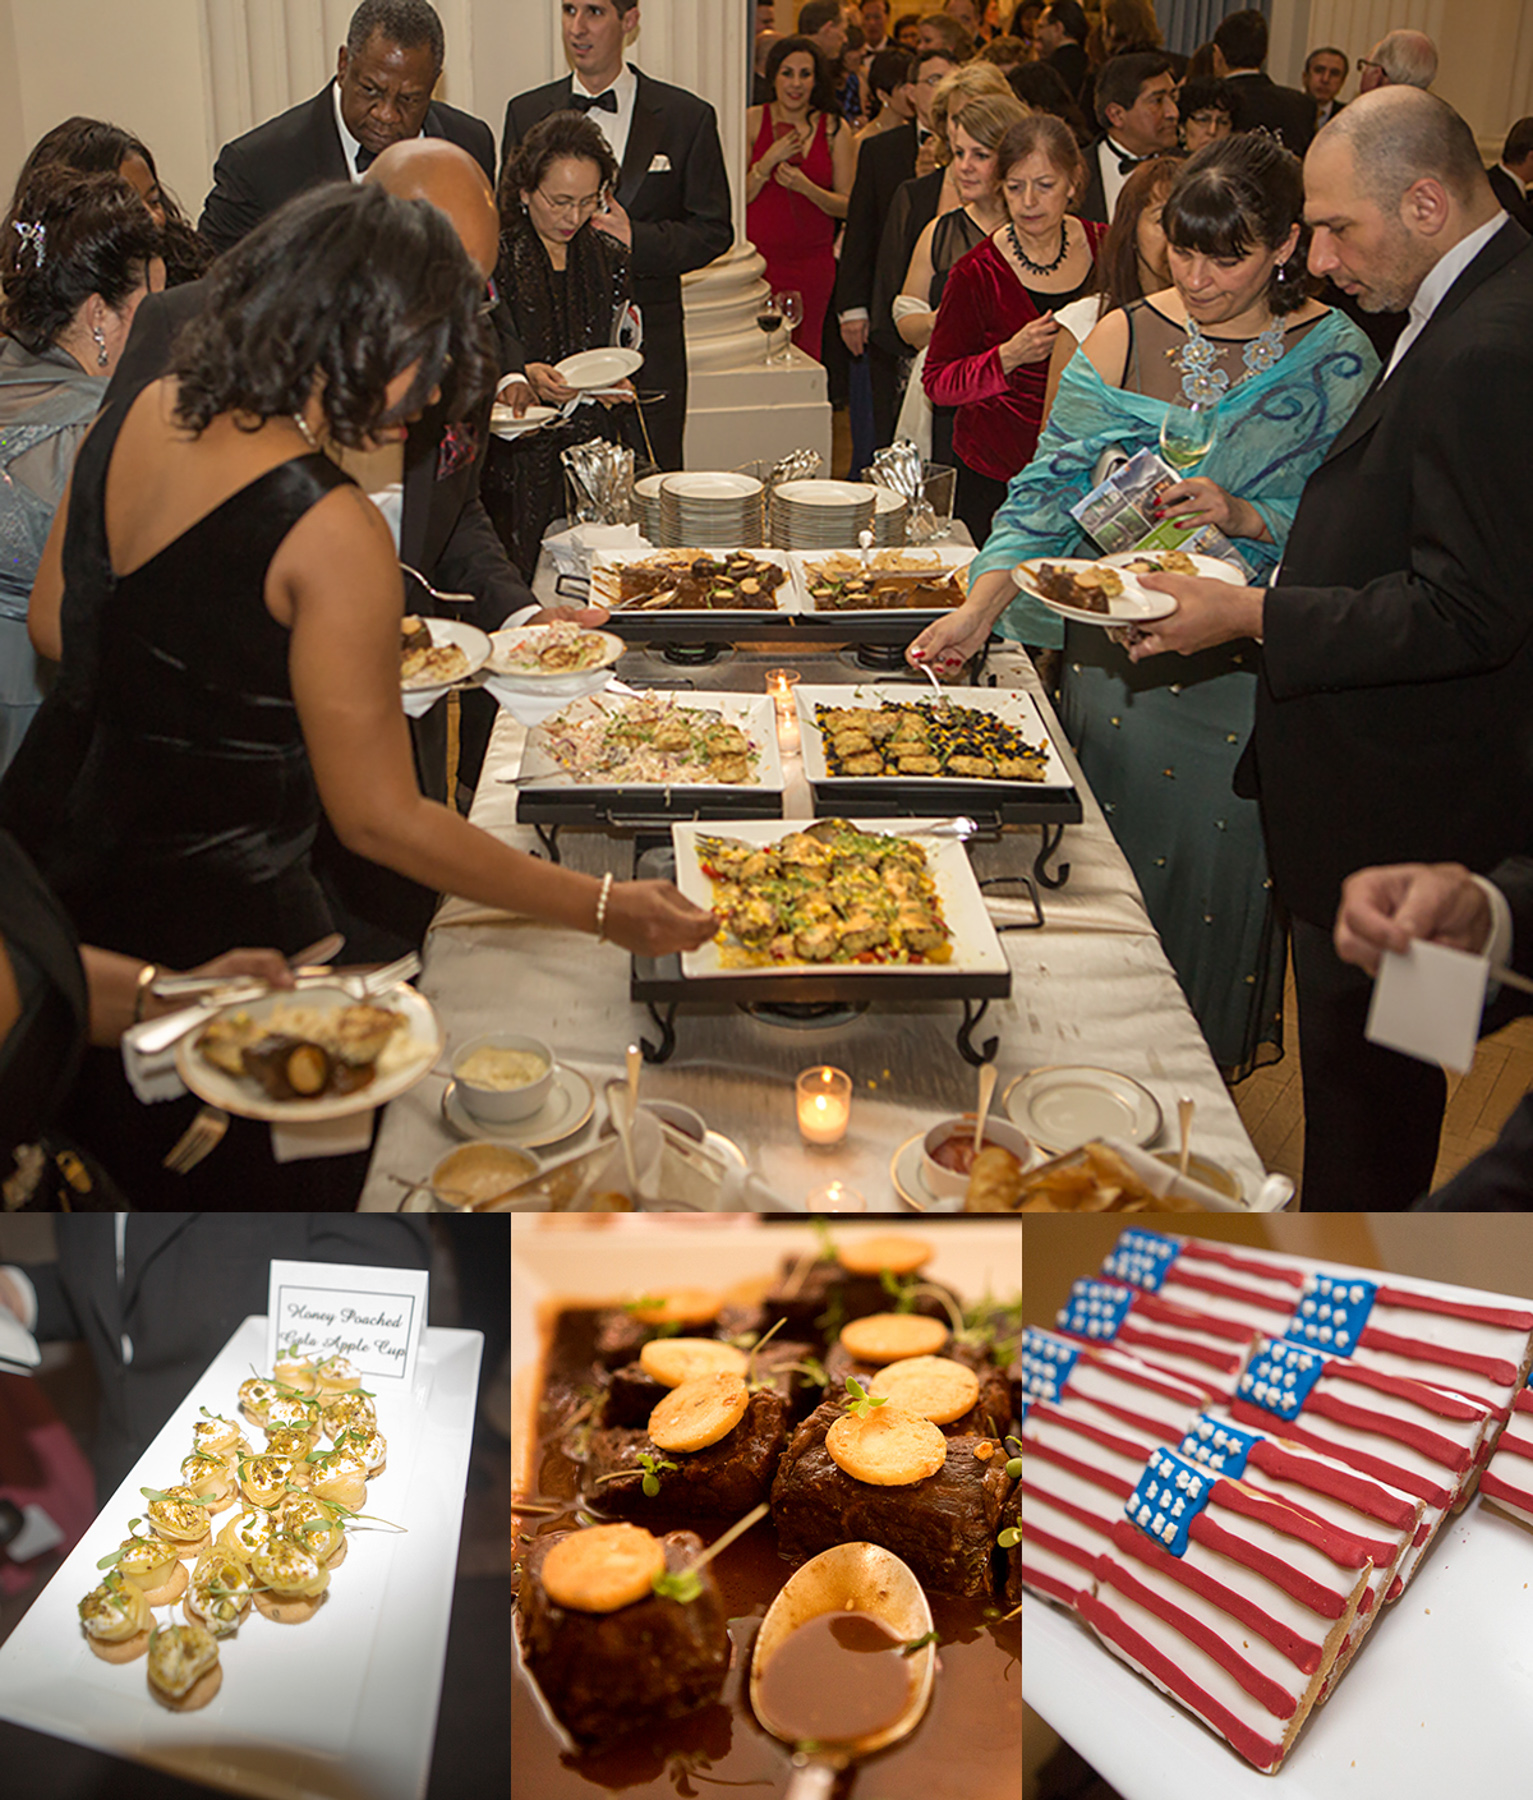 Four photos of food on buffet table and people serving themselves (State Dept./D.A. Peterson)